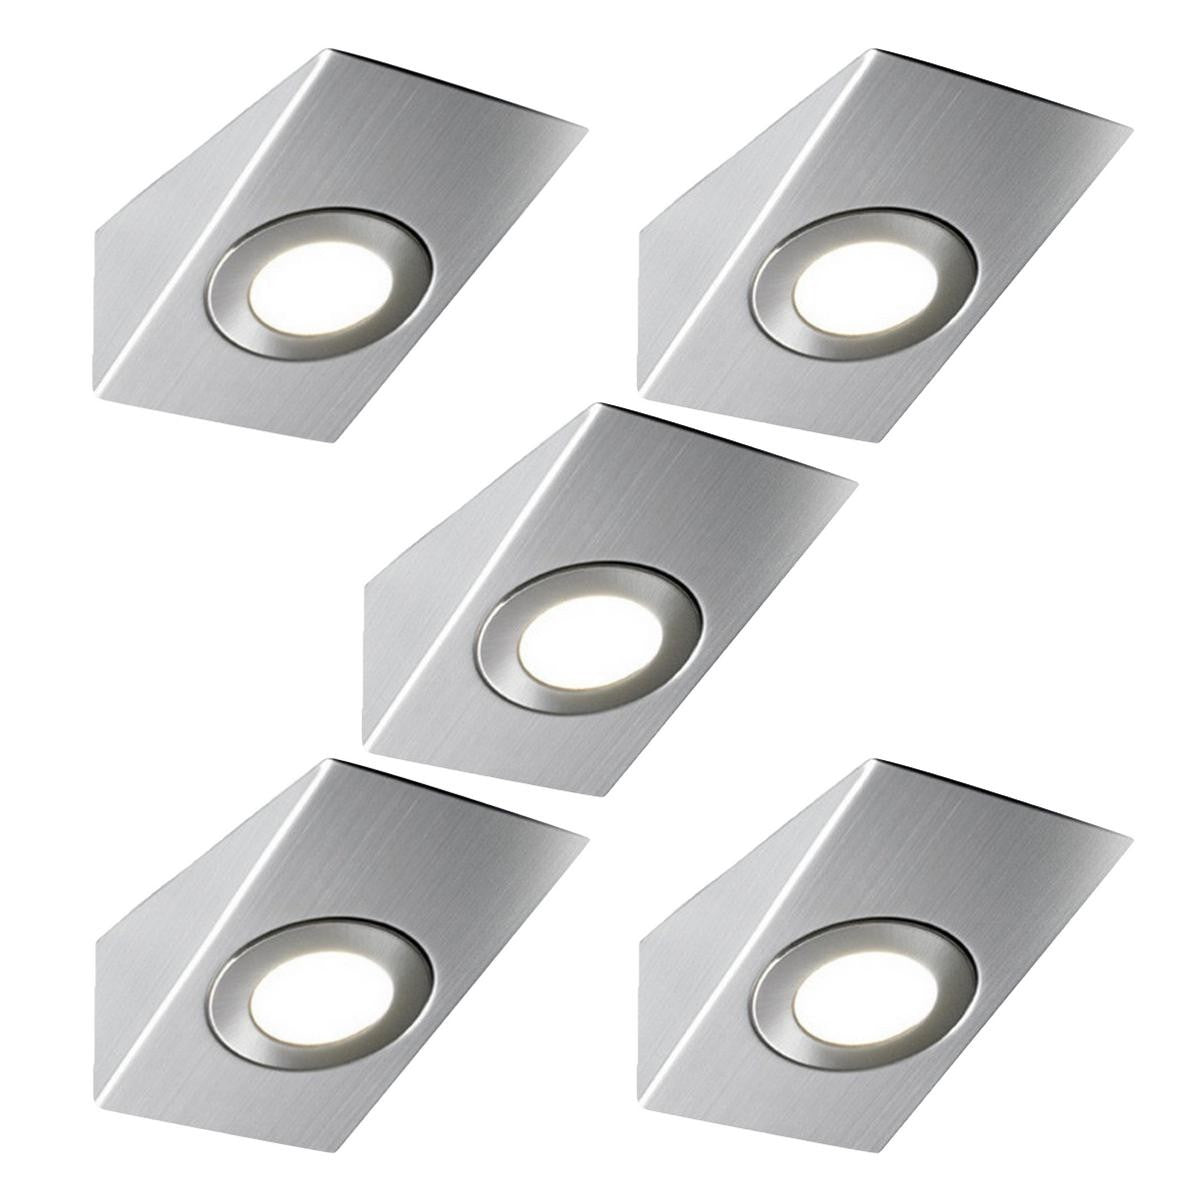 View 5 x Wedge Shaped Under Cabinet Light Kit information